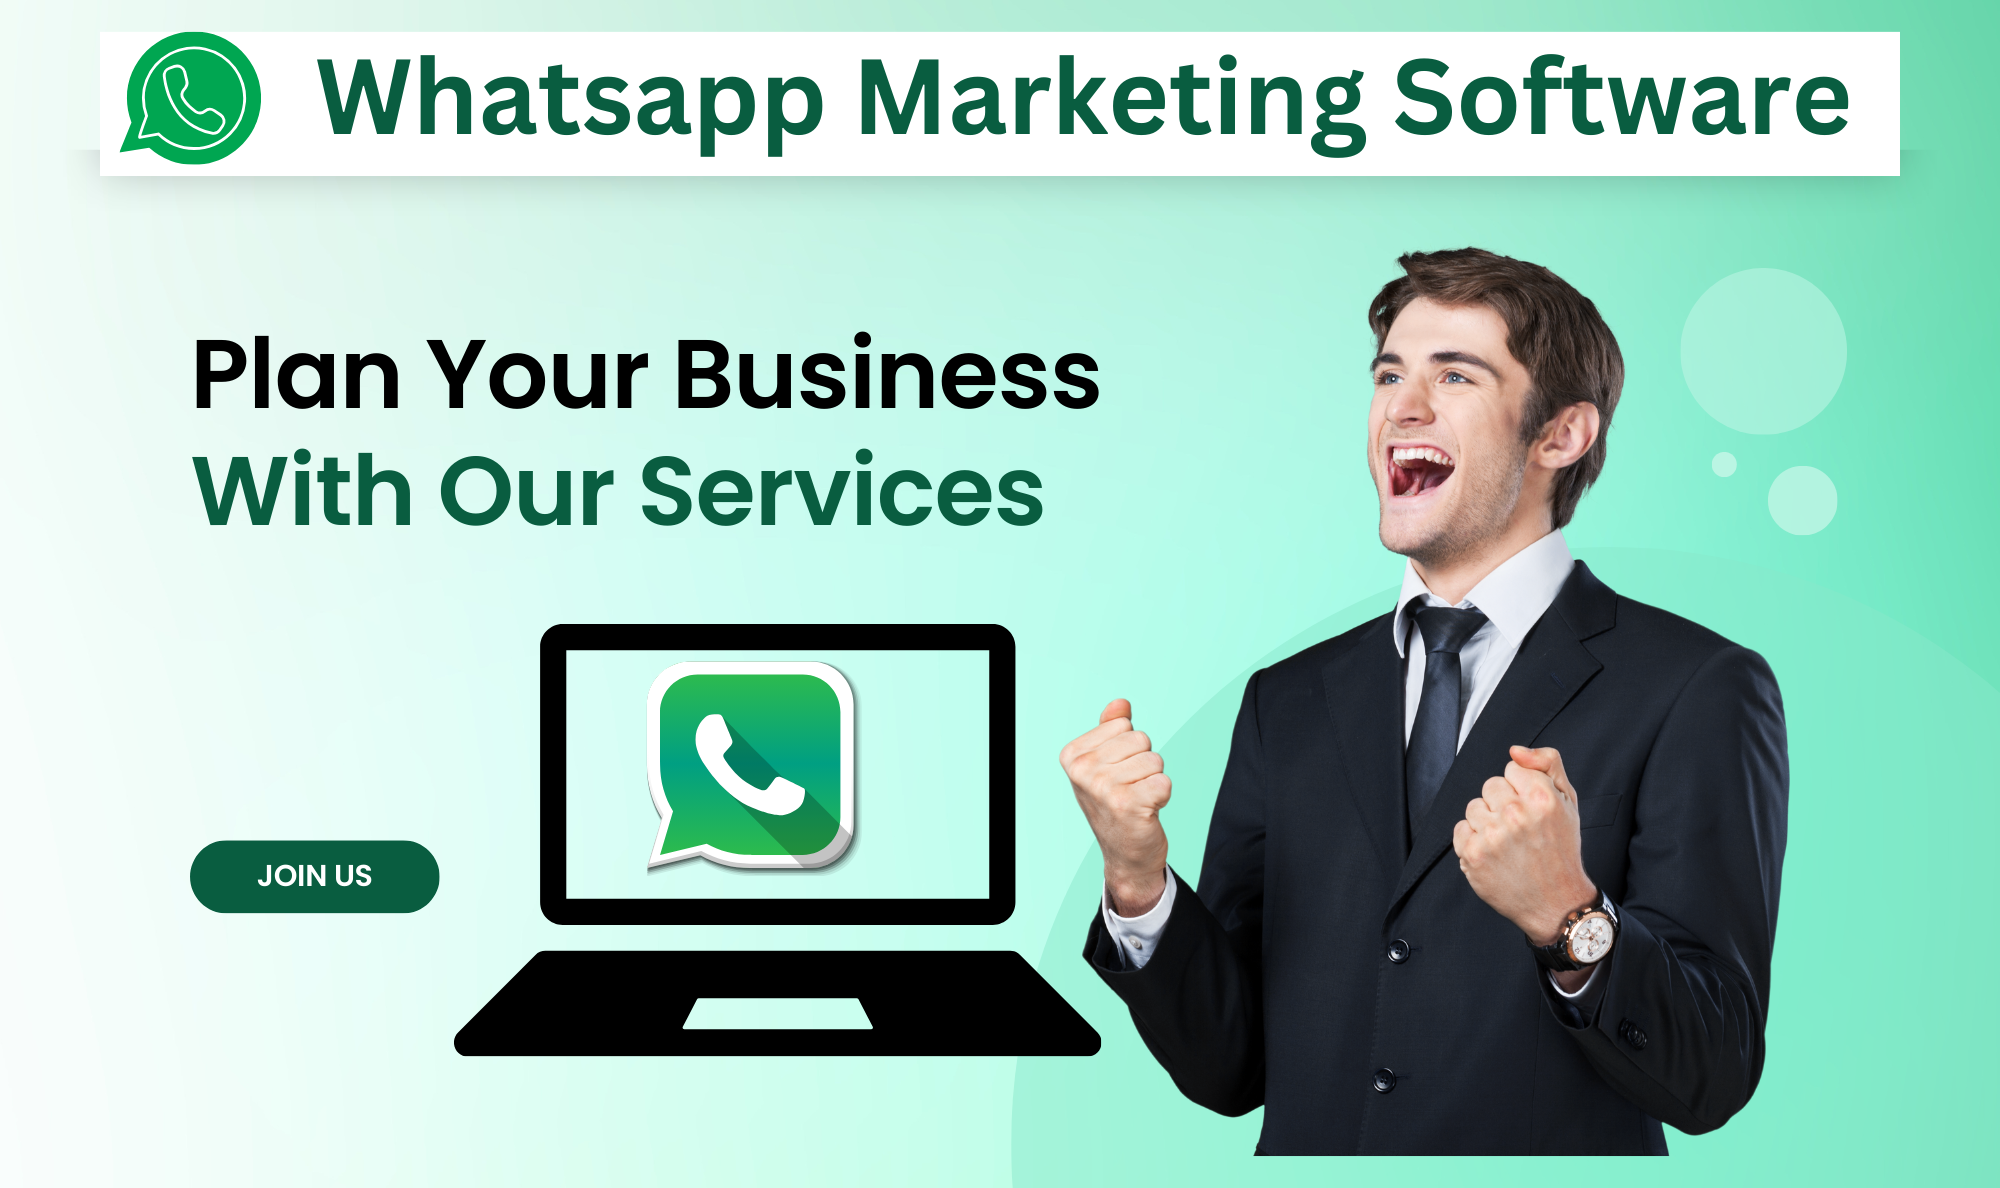 Getting Started with WhatsApp Marketing Software: Step-by-Step Guide